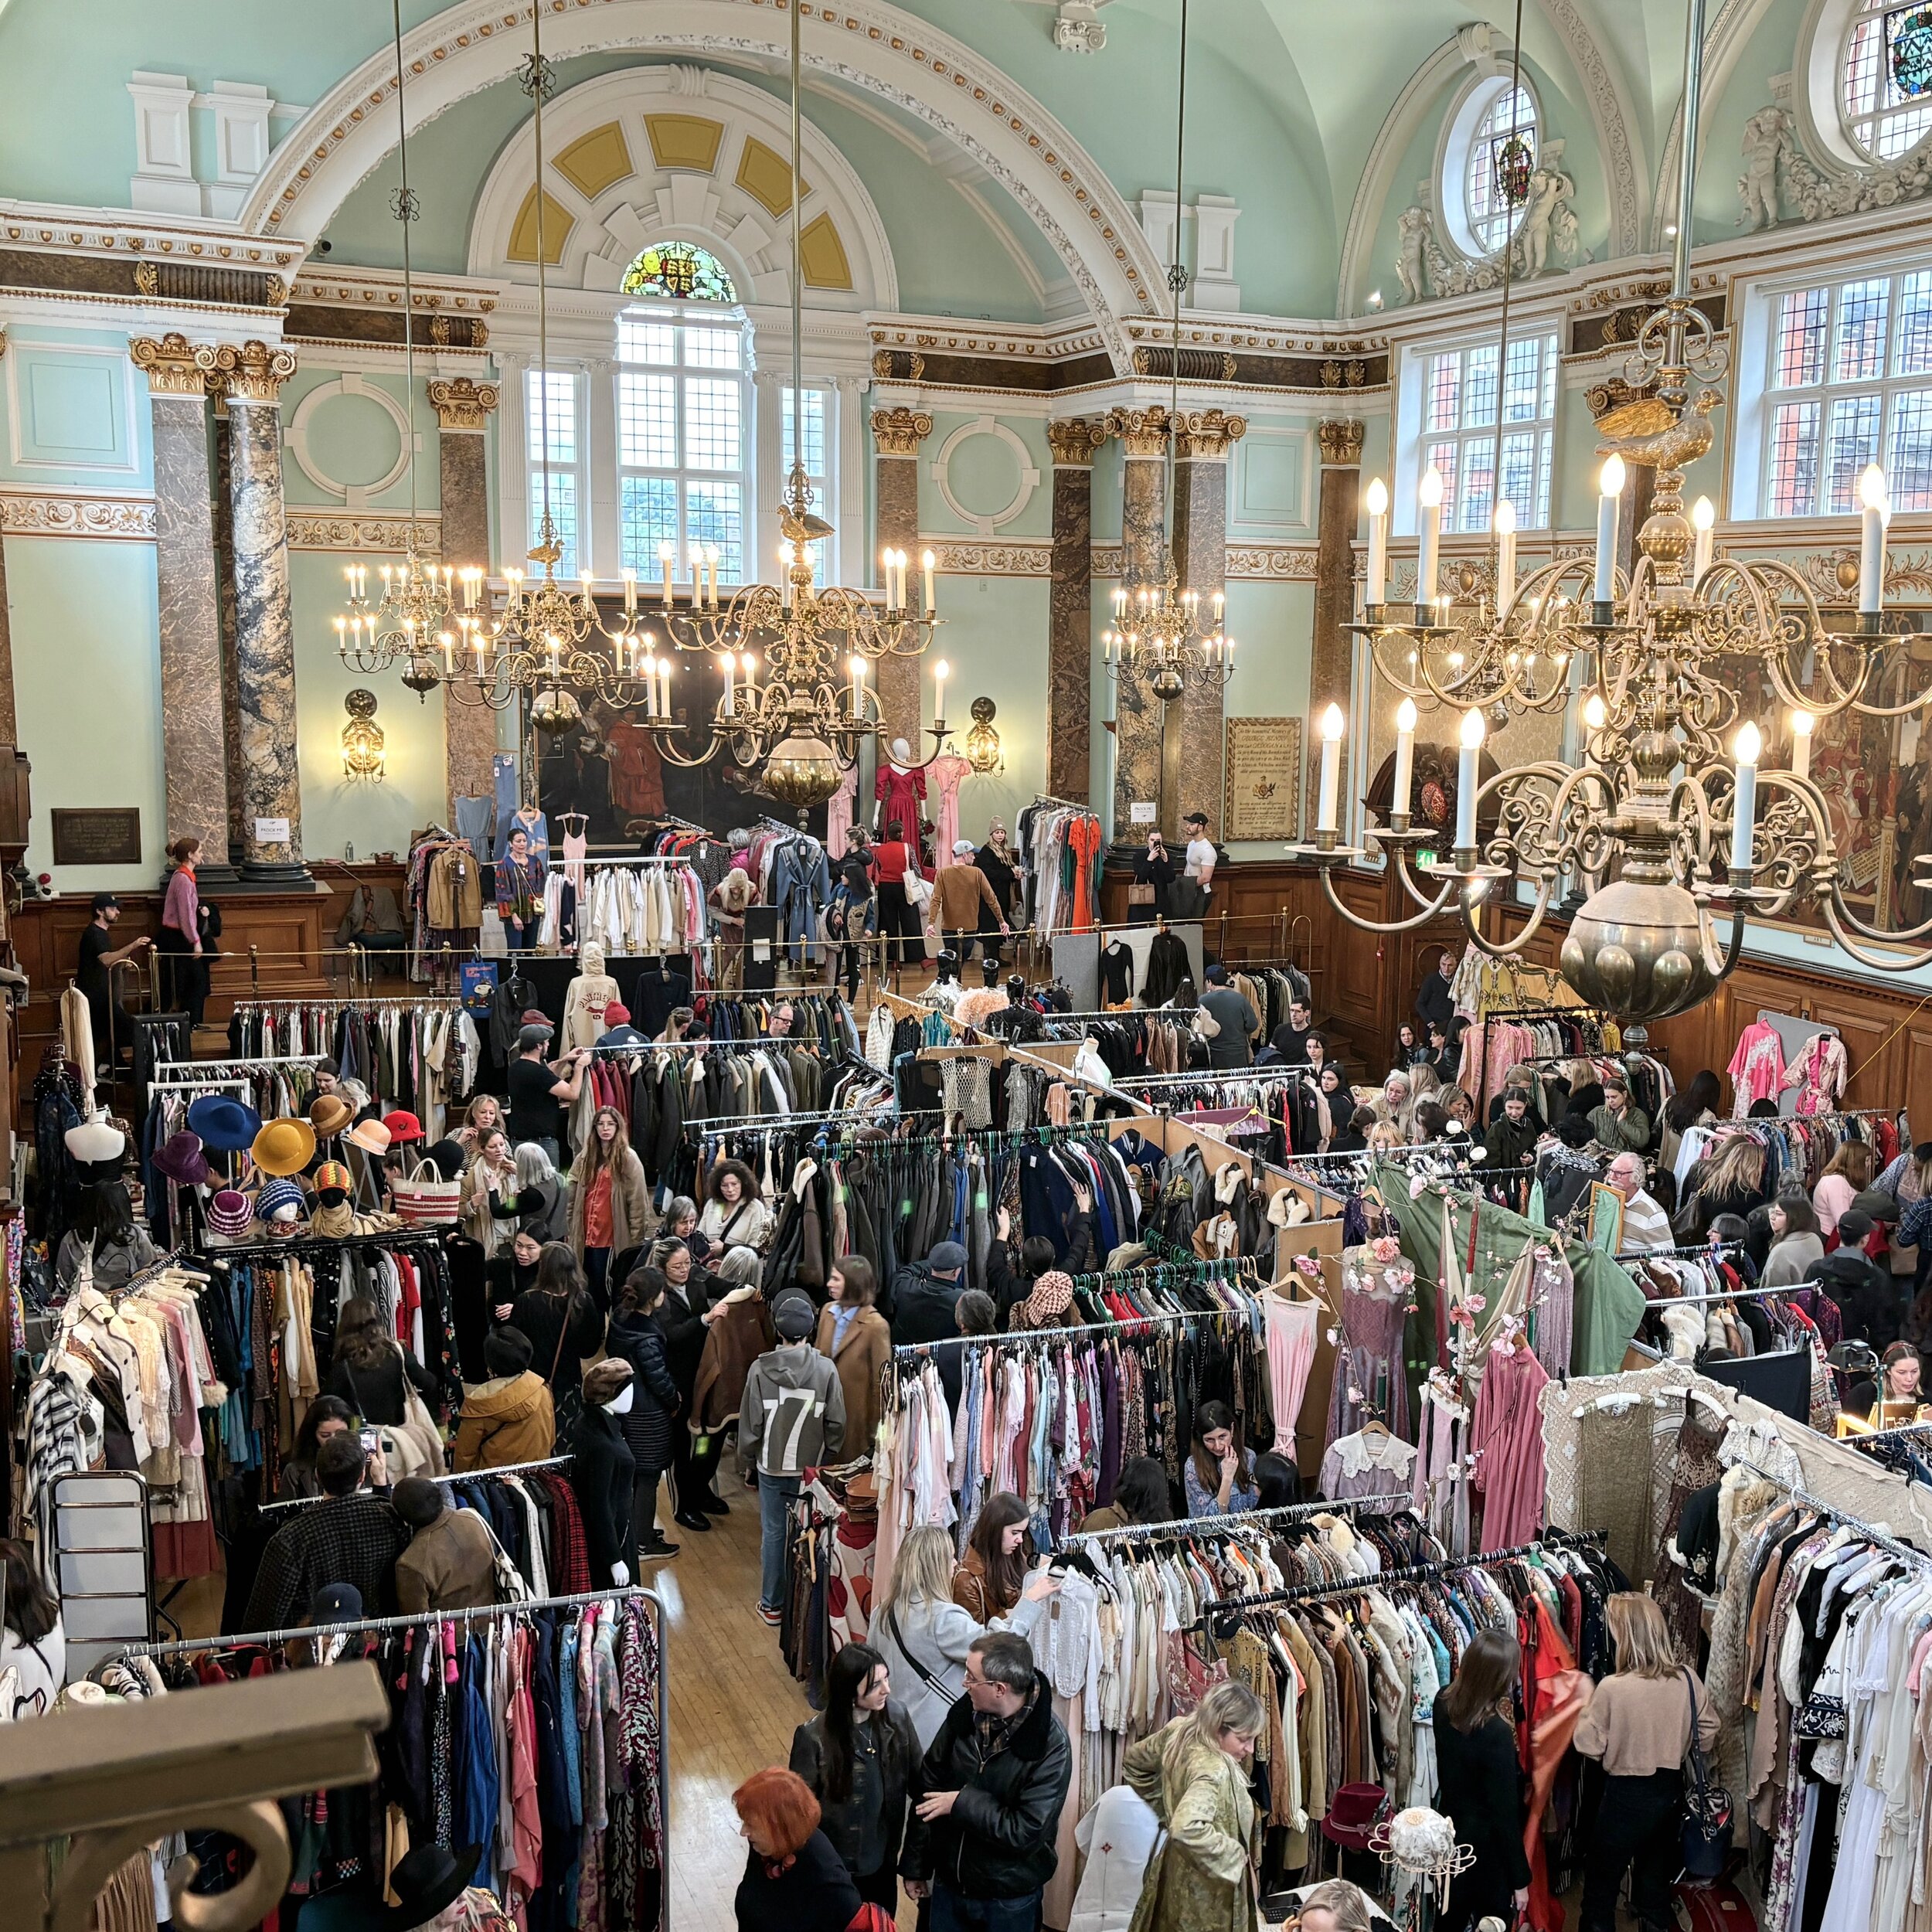 Back after Easter 🪺🌿 Just over two weeks until the next Frock Me! Vintage Fair at Chelsea Old Town Hall 
Sunday 14th April | 11am ~ 5.30pm 
Ticket details linked in bio

🚇 Sloane Square 

#frockmevintagefair #chelseaoldtownhall #kingsroad #antique